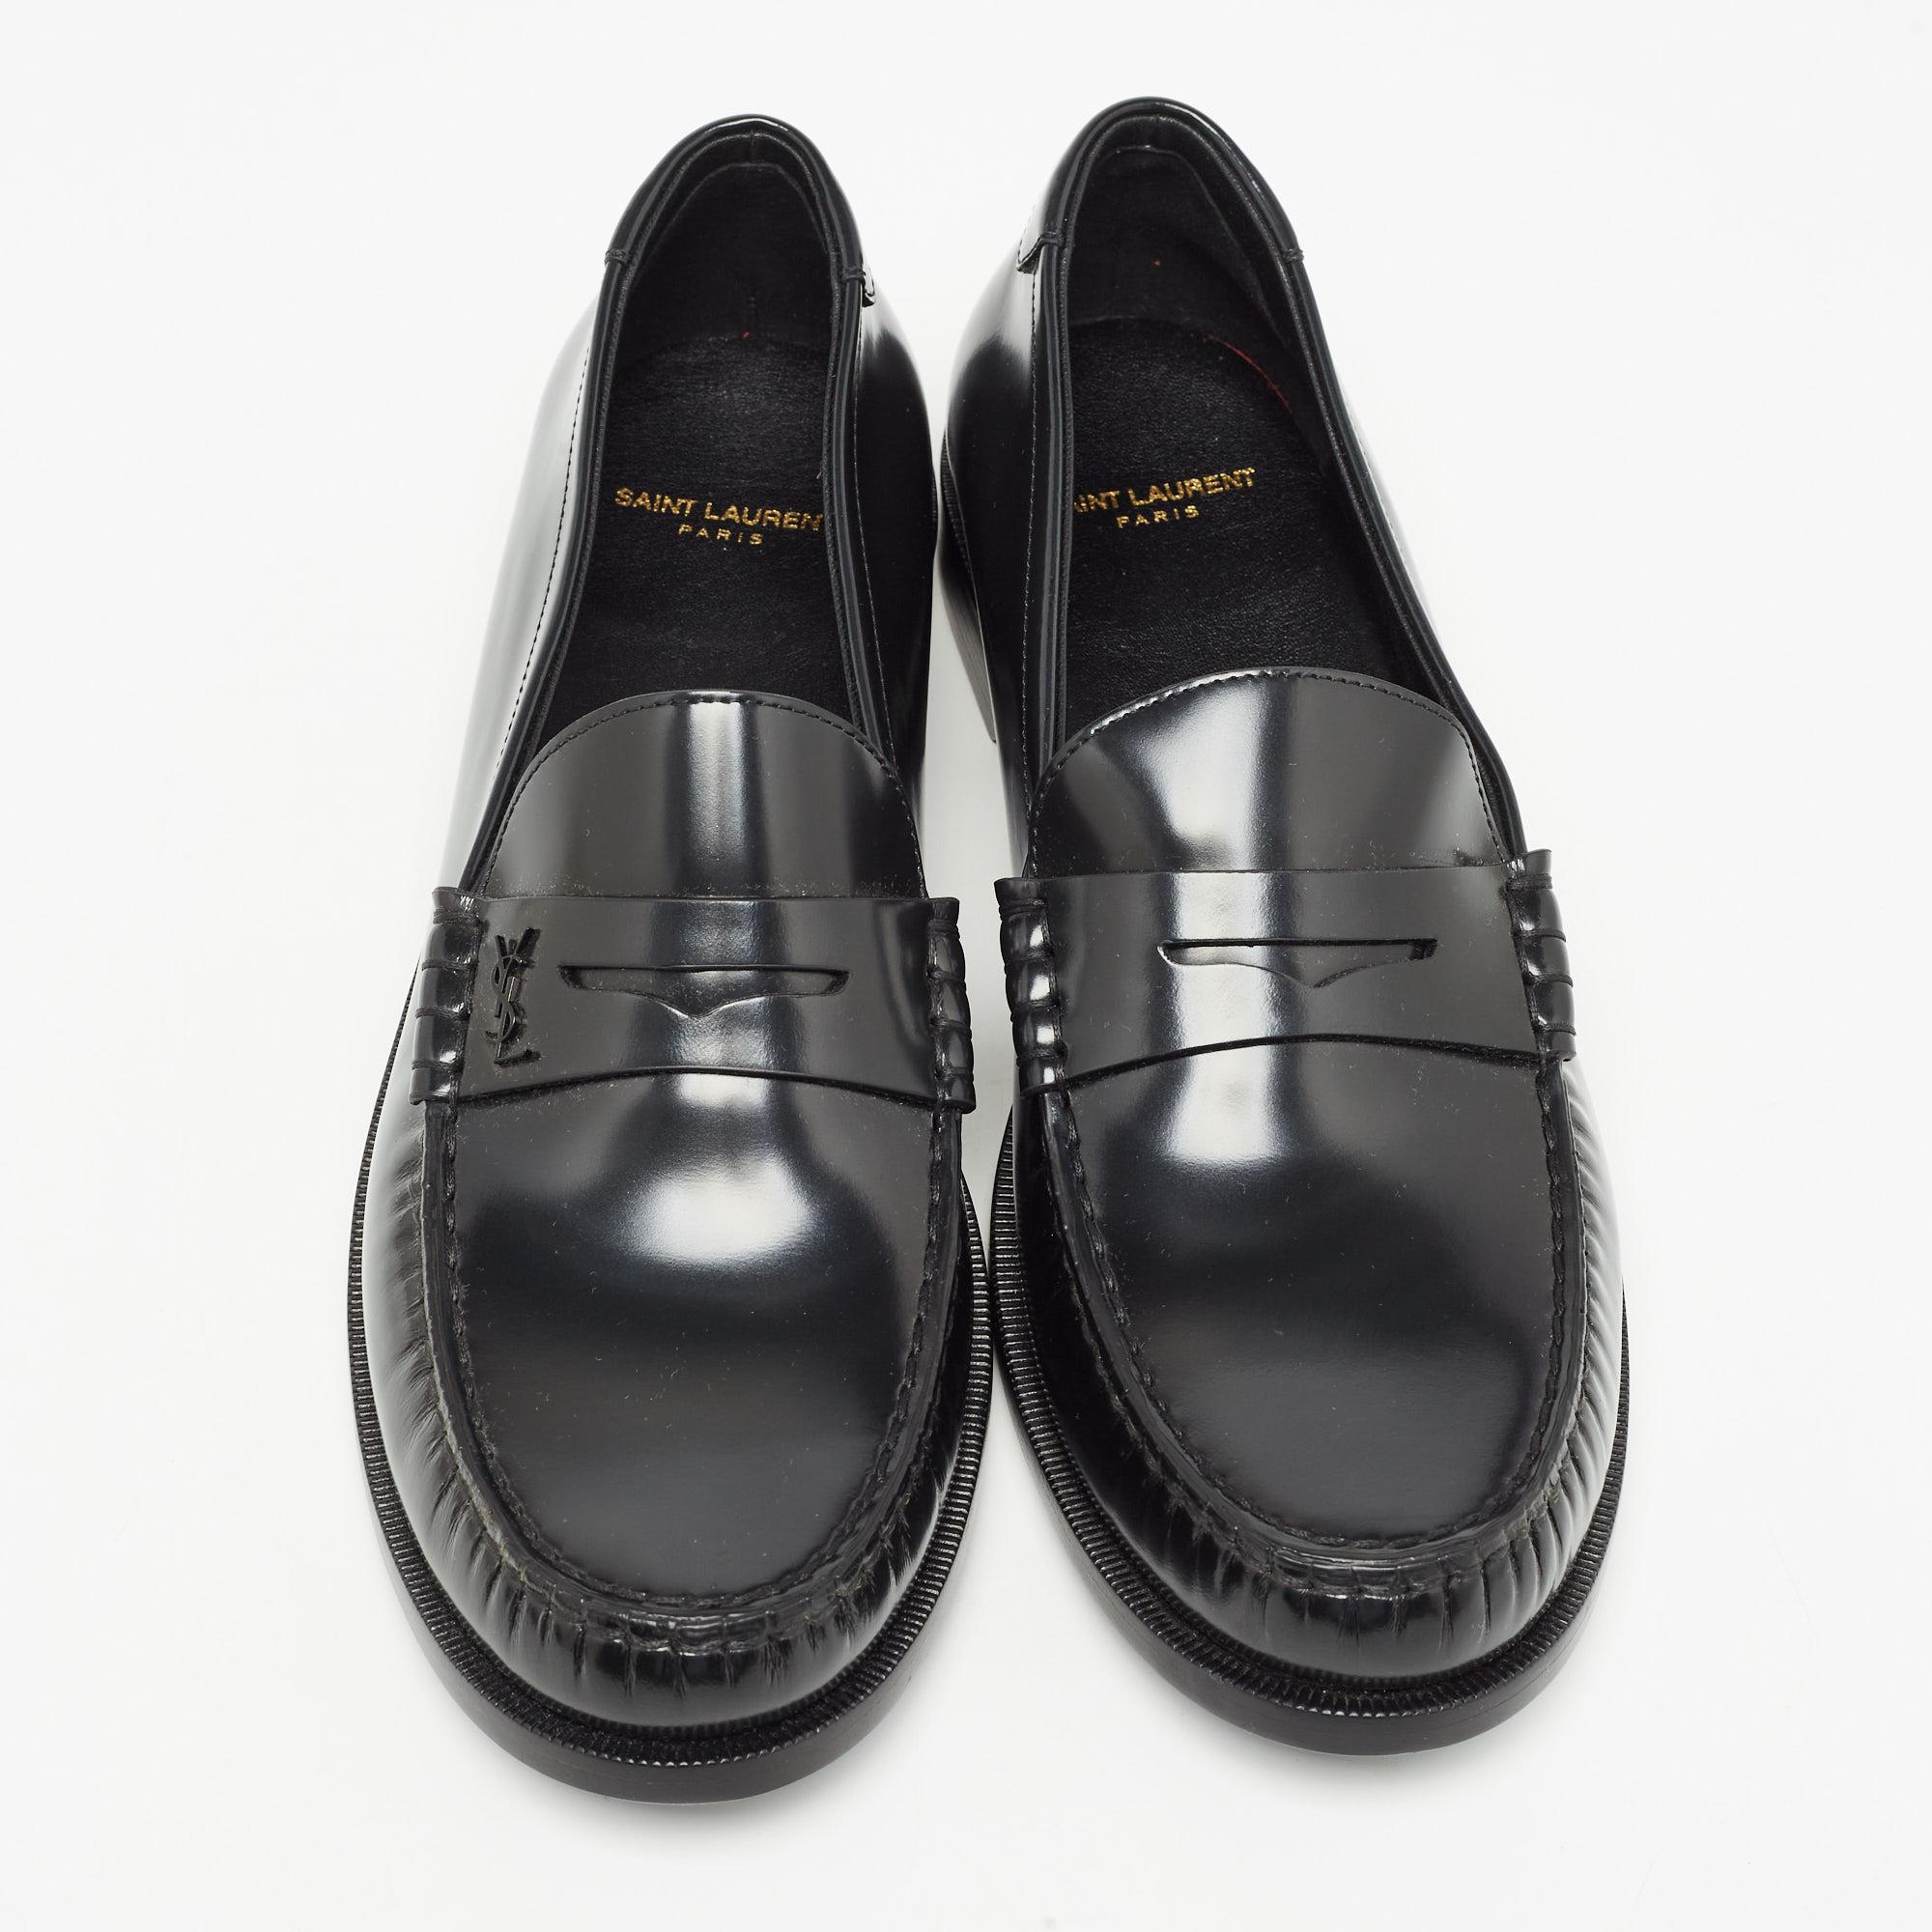 These designer loafers by Saint Laurent will be your favorite go-to pair for off-duty looks. Crafted using leather, the flats have round toes and durable soles.

Includes
Original Box